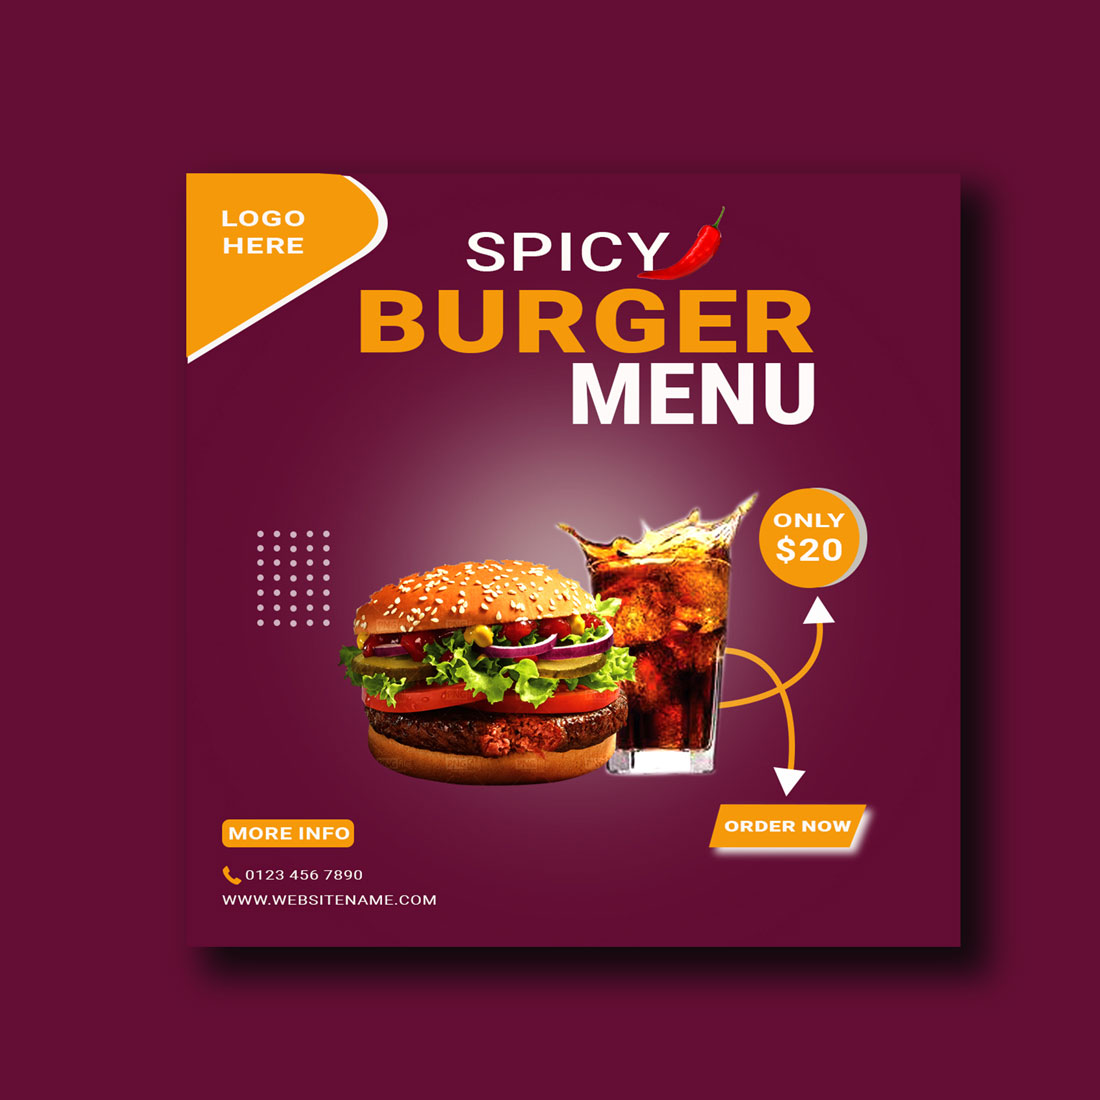 Spicy Food Social Media Post Template cover image.